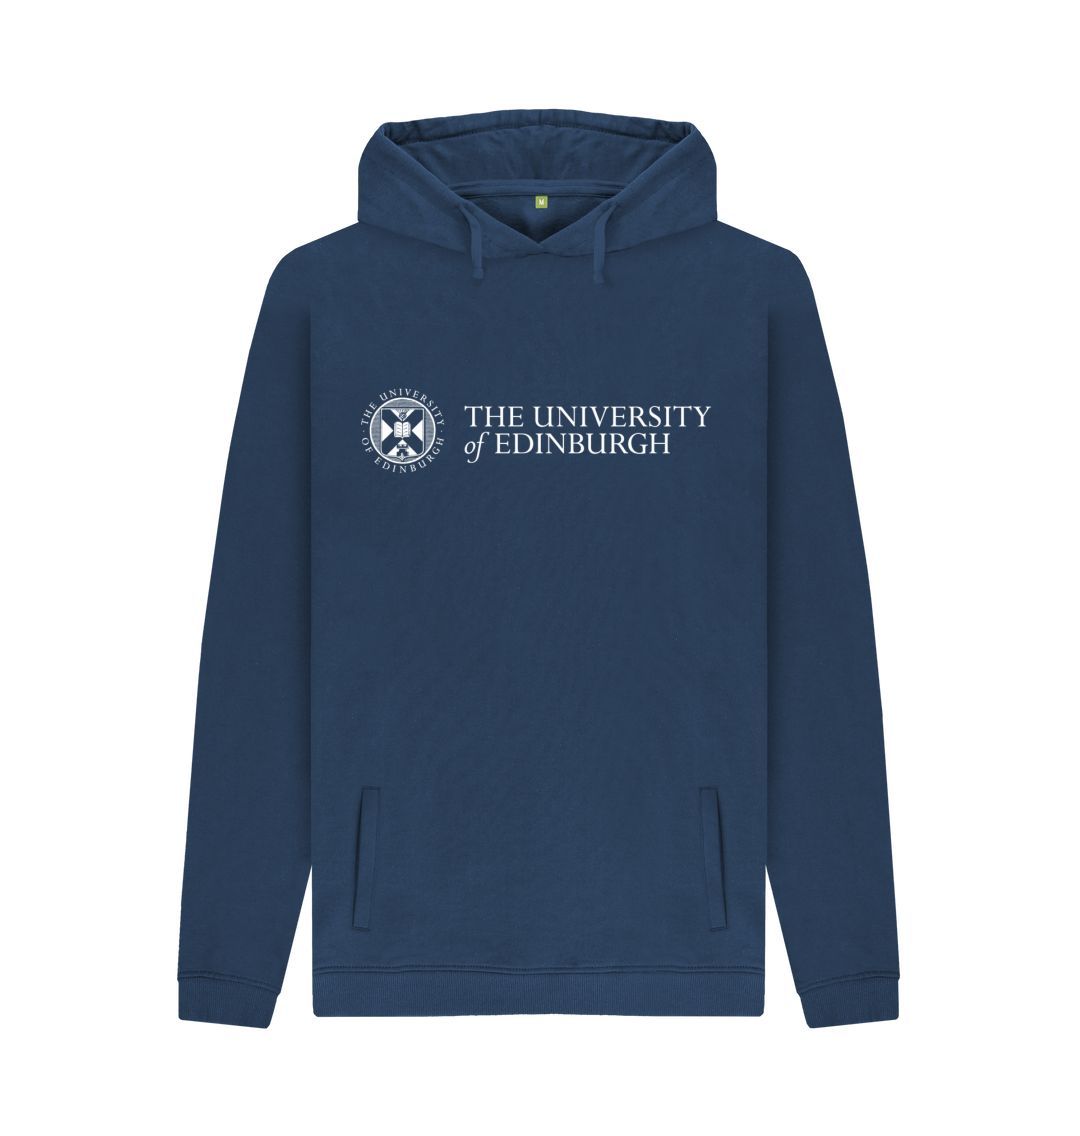 A navy pullover hoodie with the University logo printed across the chest in white